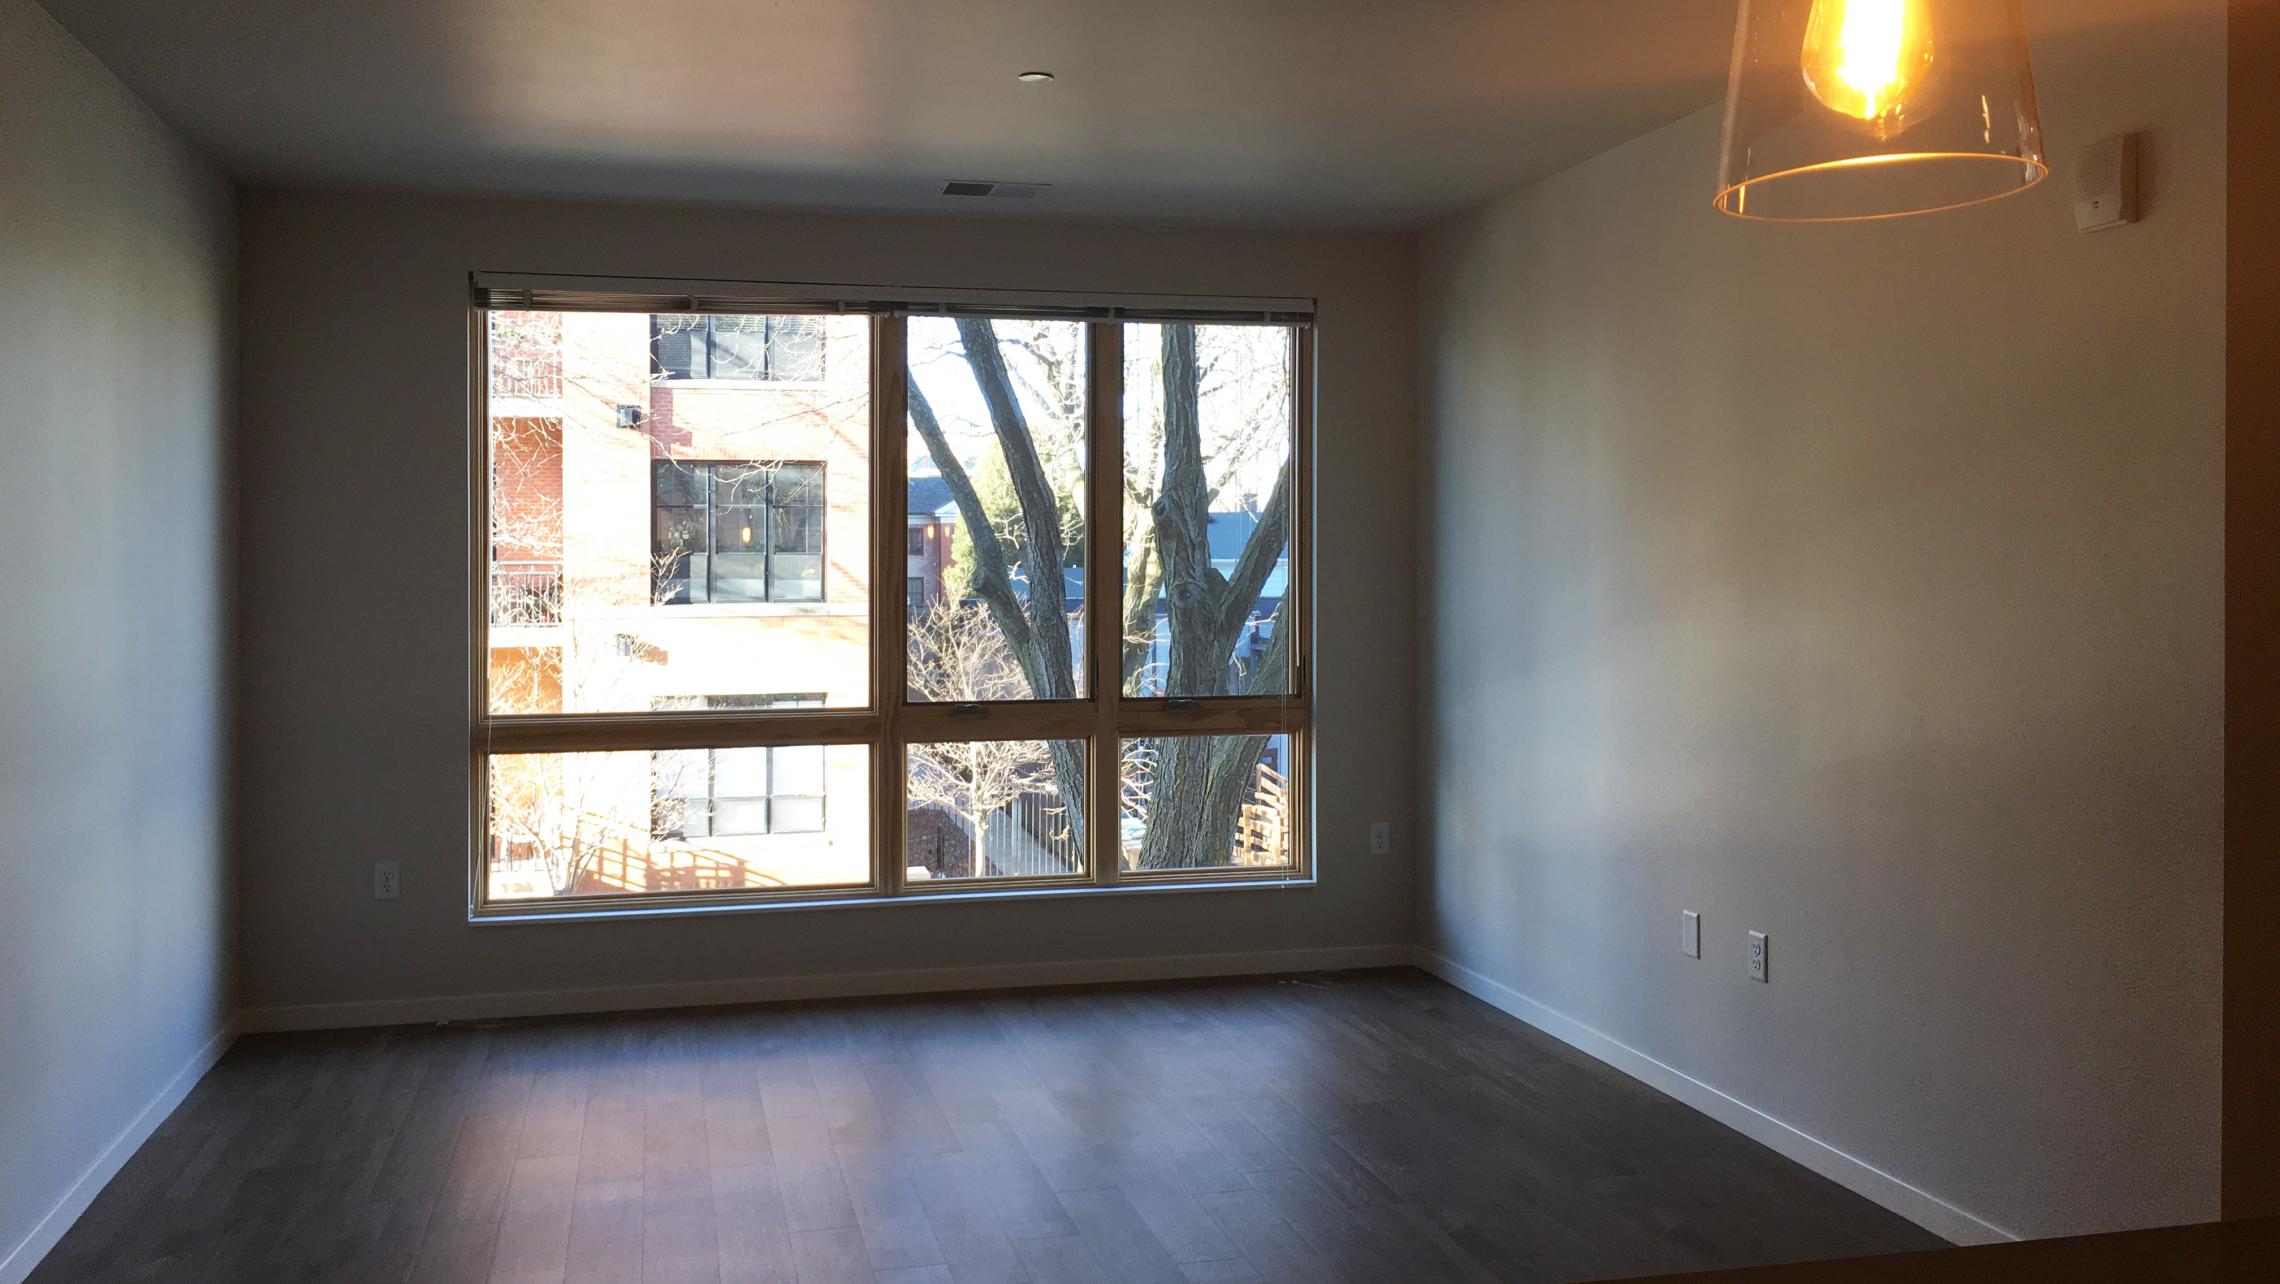 Quarter-Row-Apartment-217-ADA-Two-Bedroom-Bathroom-Modern-Design-Upscale-Fitness-Terrace-Lounge-Gym-Dogs-Cats-Downtown-Madison-Bike-Path-The-Yards